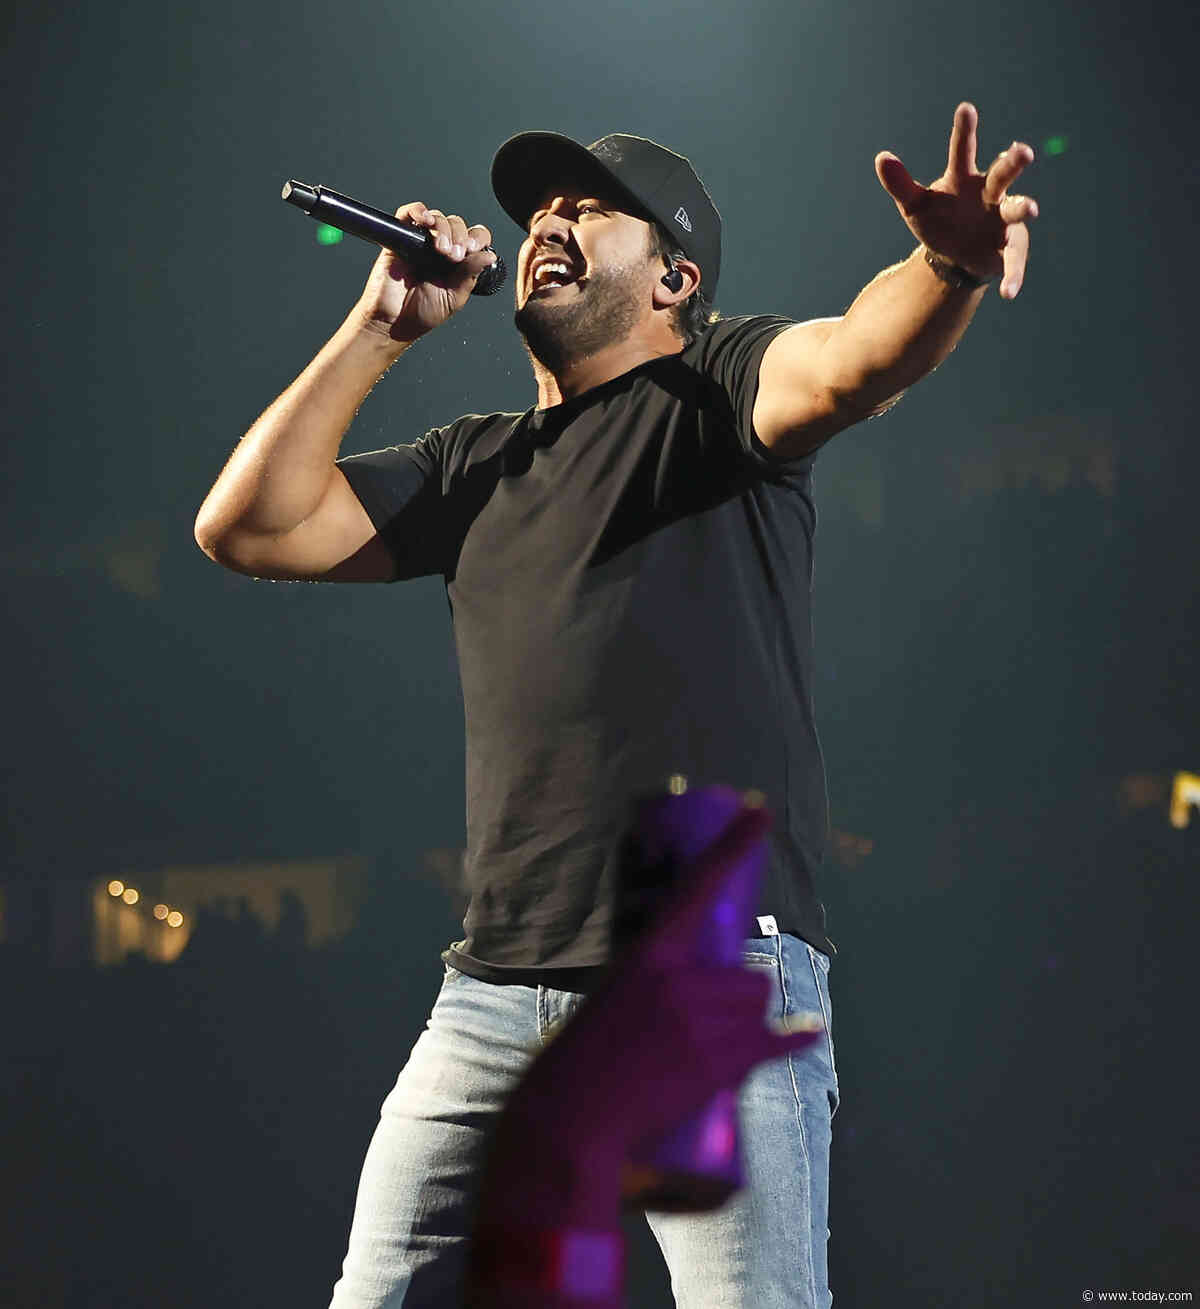 Luke Bryan slips on phone mid-show — and fans praise him for 'grace and even humor'